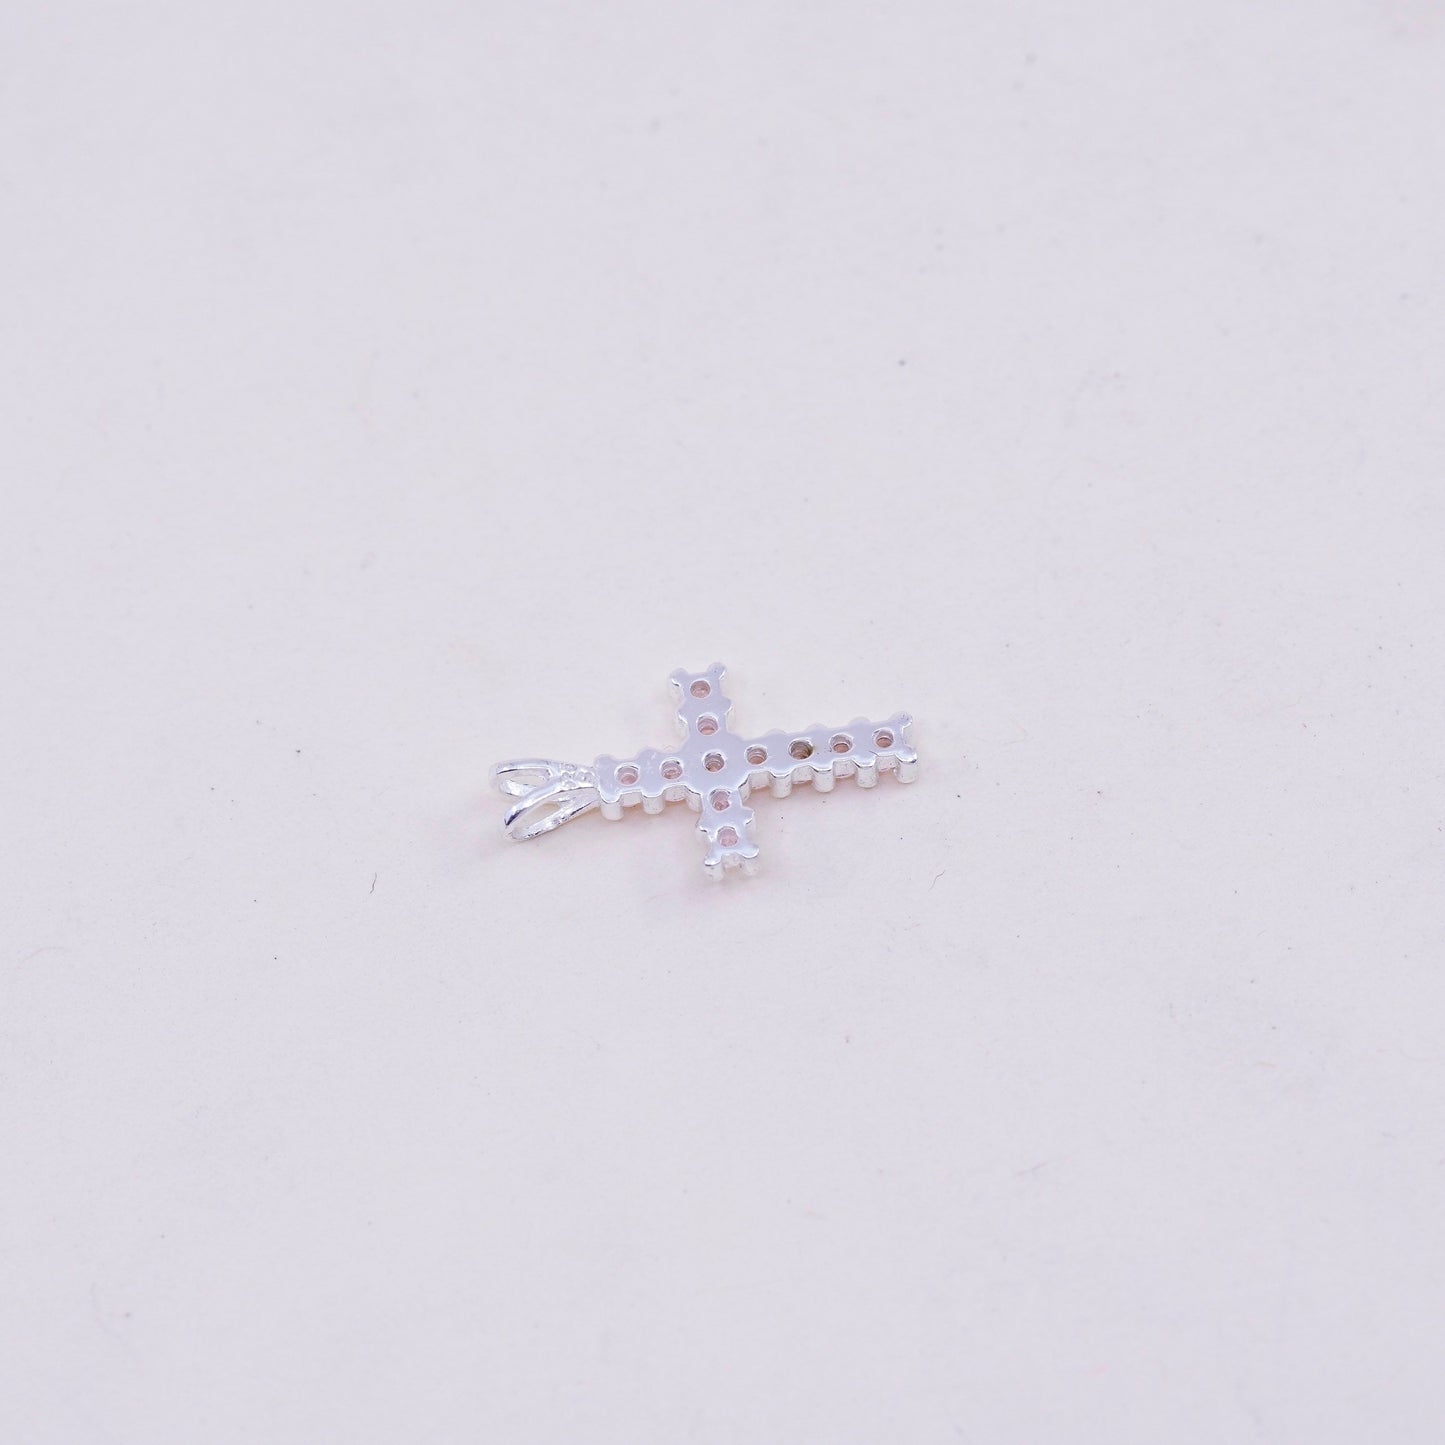 Vintage sterling silver pendant, 925 cross handmade charm with pink cz